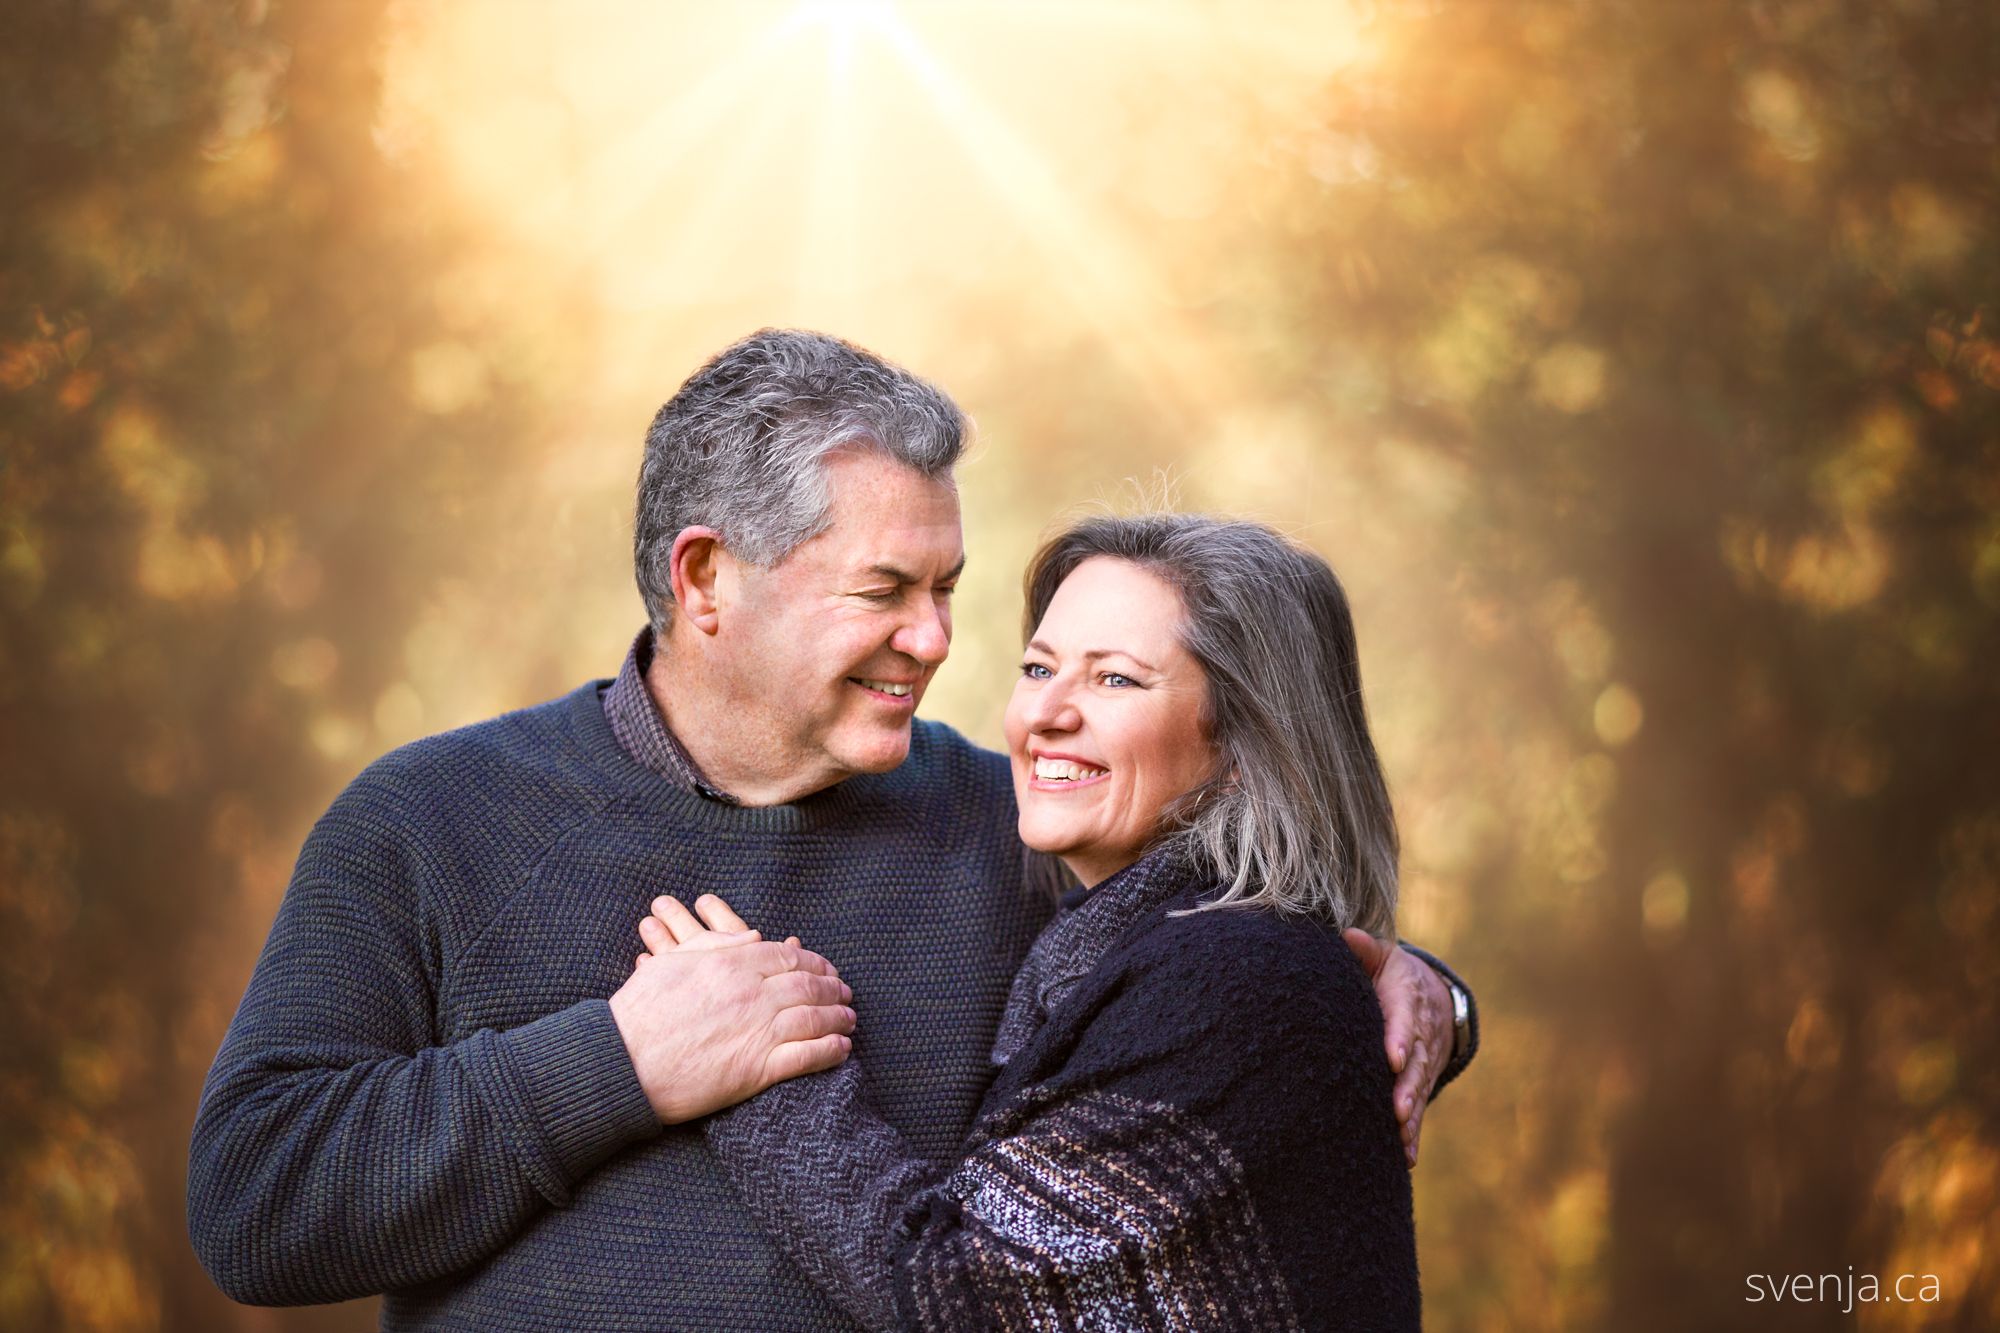 husband and wife share a smile while he holds her in front of trees with sun beams behind them